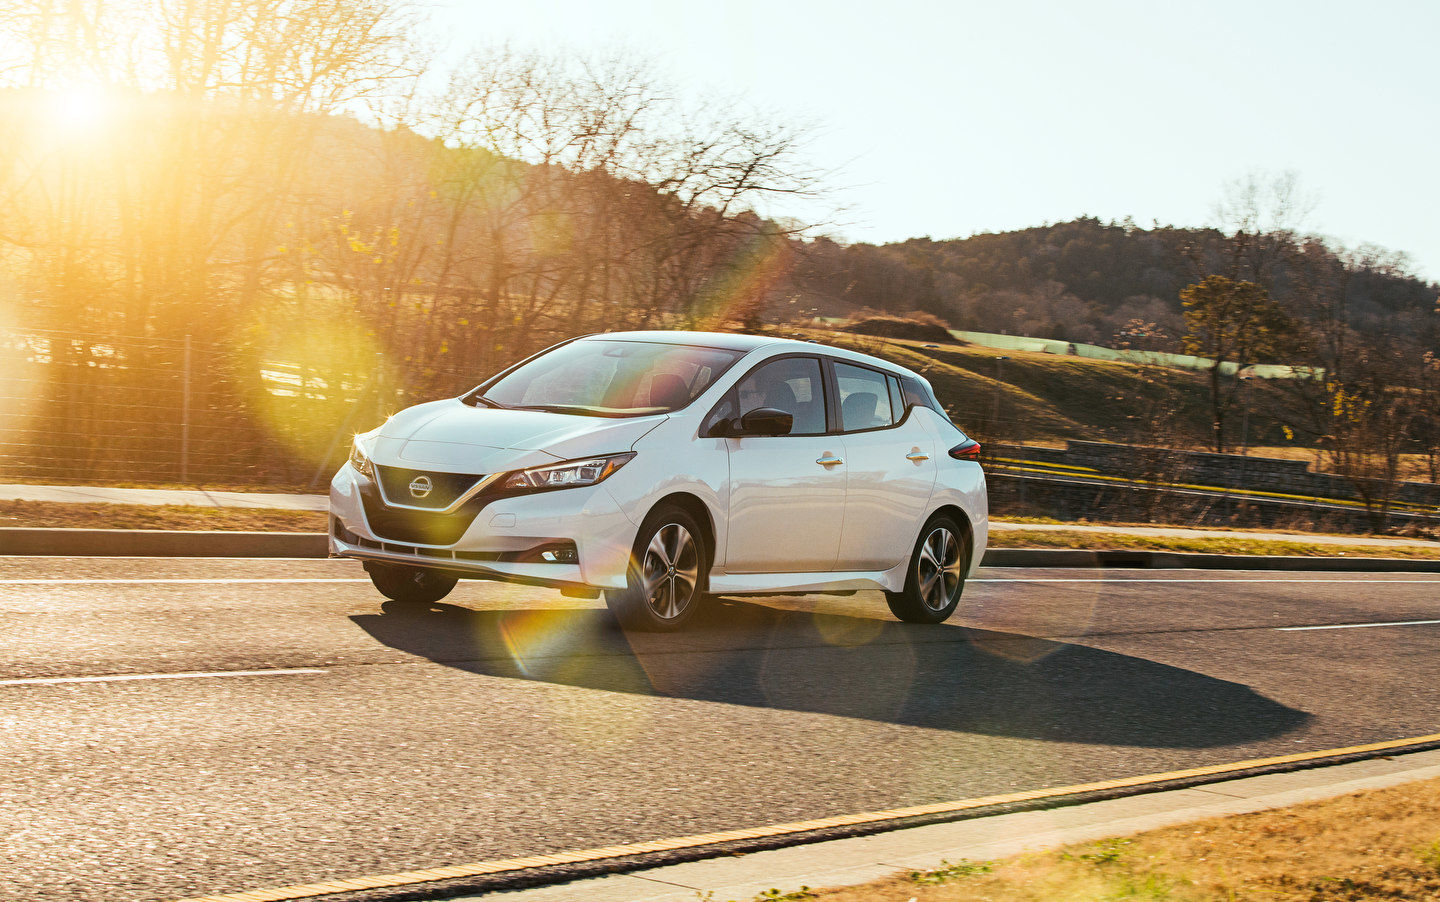 The Nissan LEAF is the electric vehicle that gives you the most value in Canada